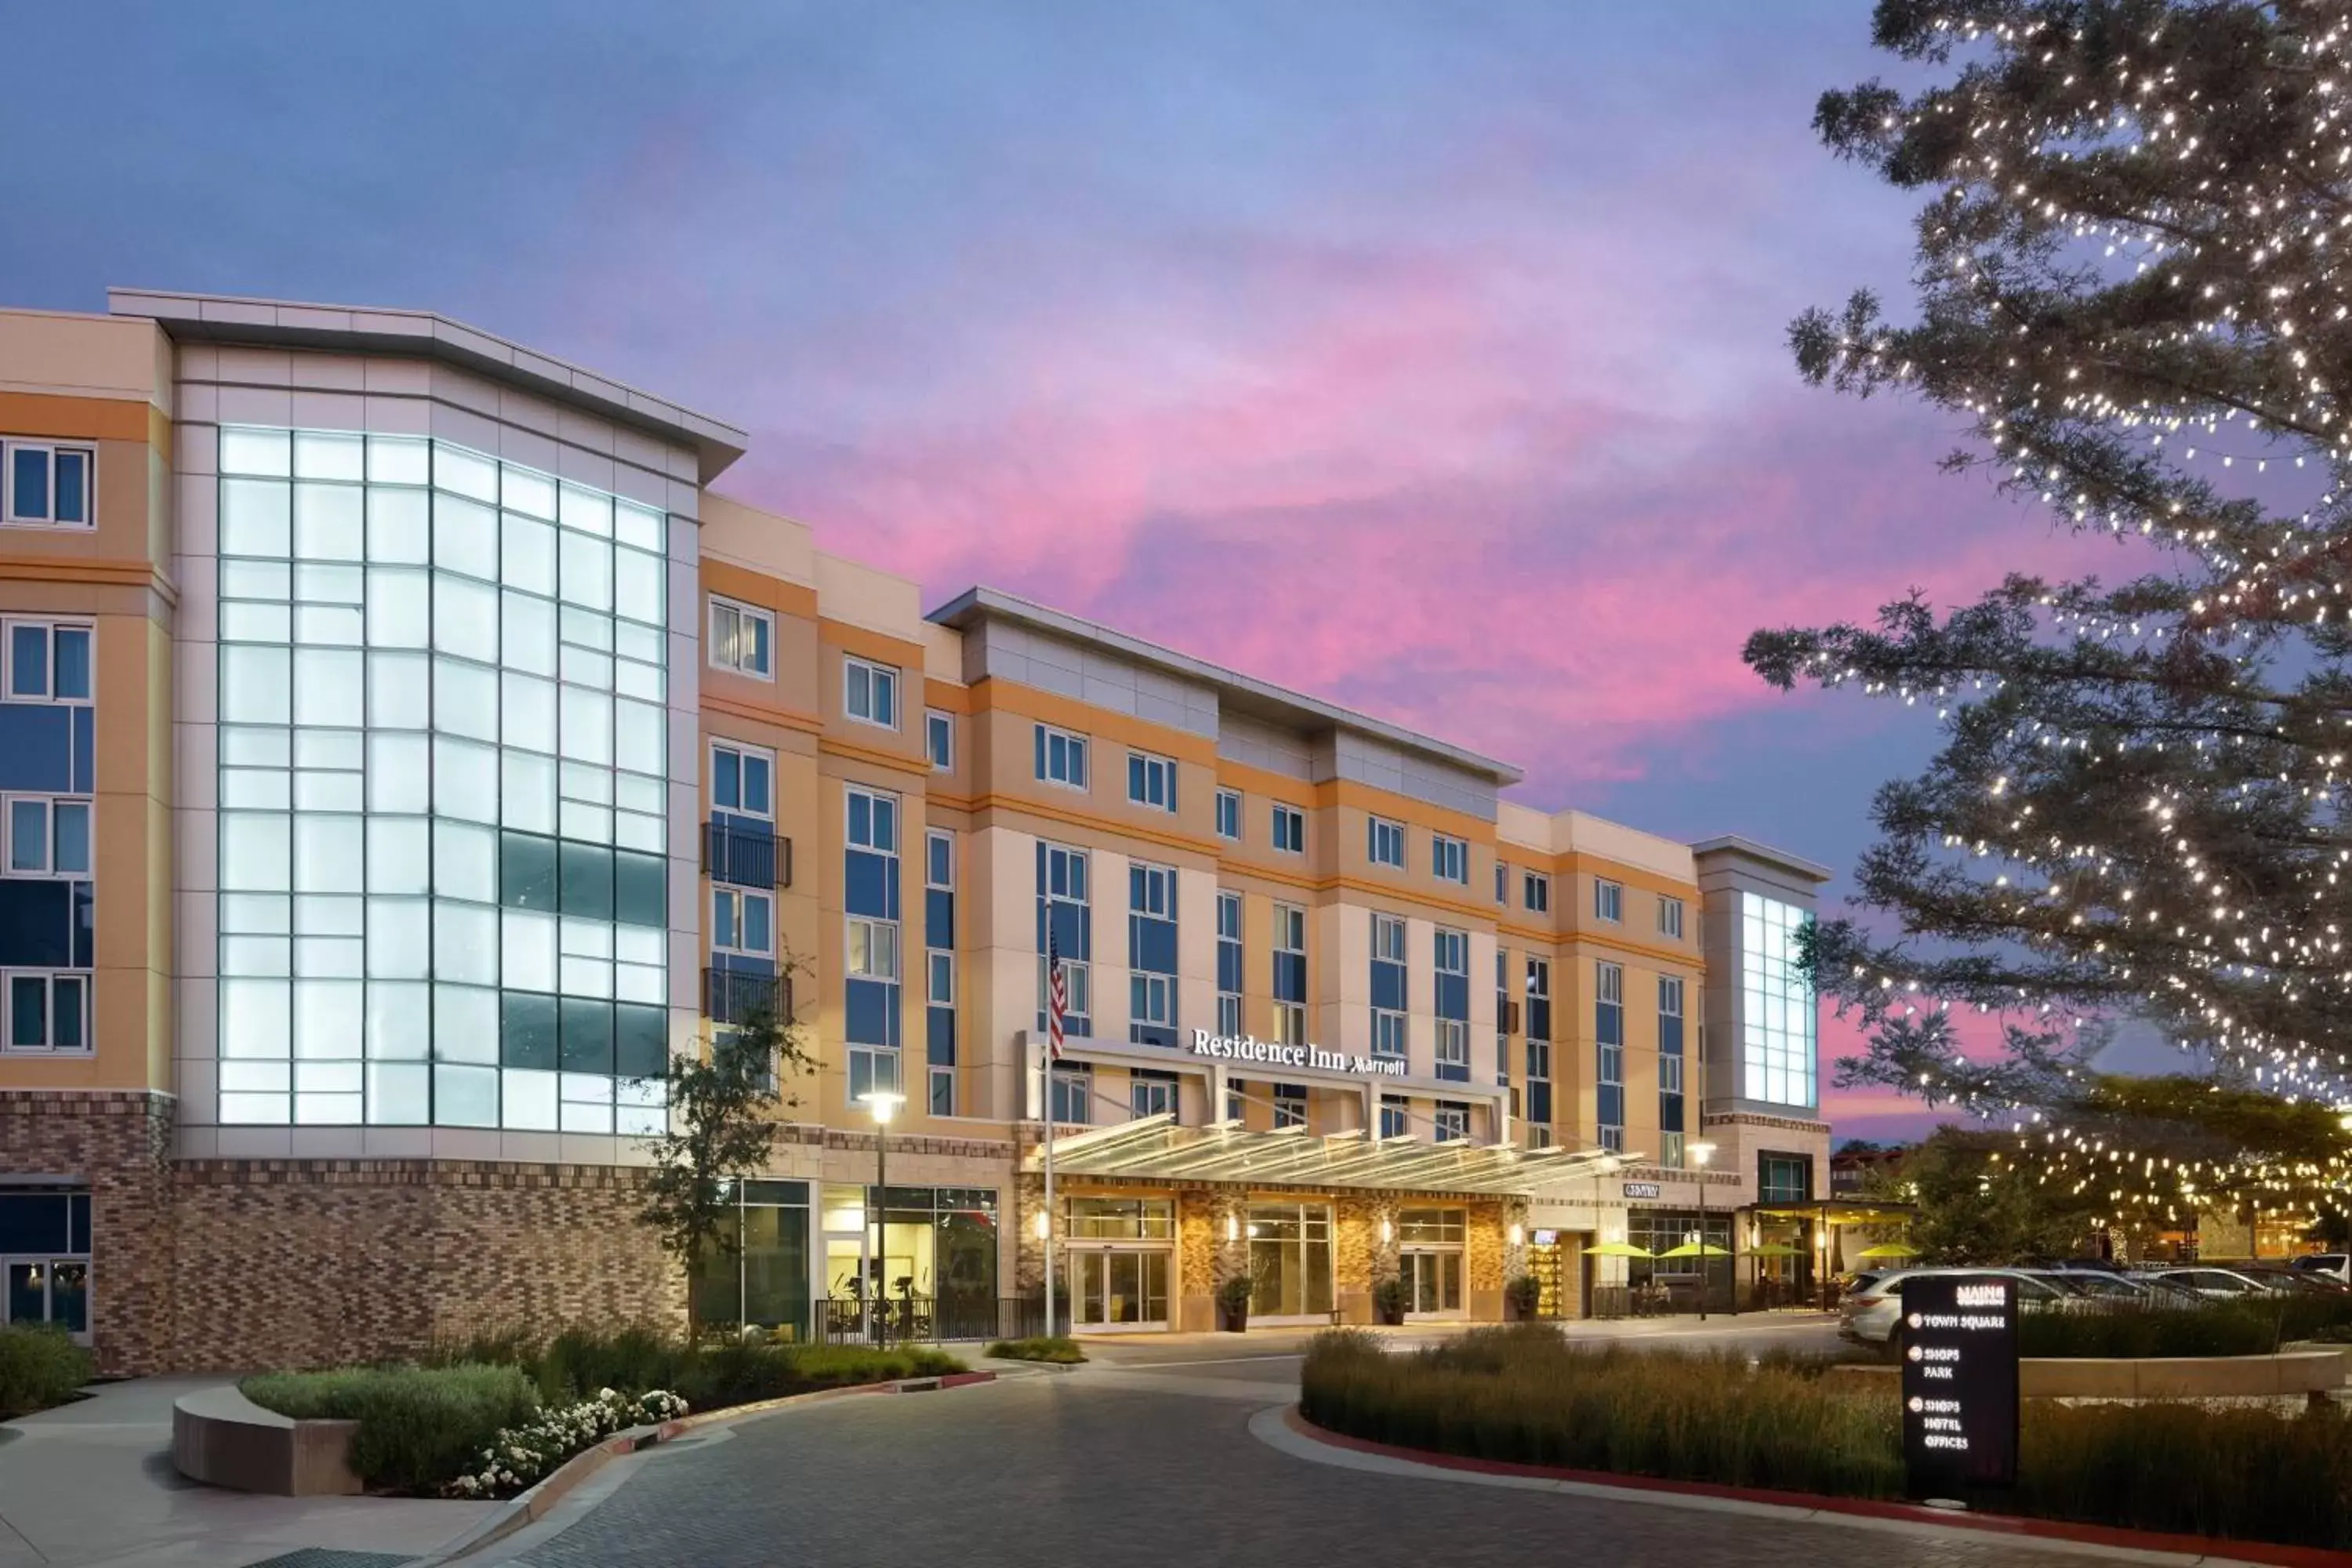 Property Building in Residence Inn by Marriott San Jose Cupertino